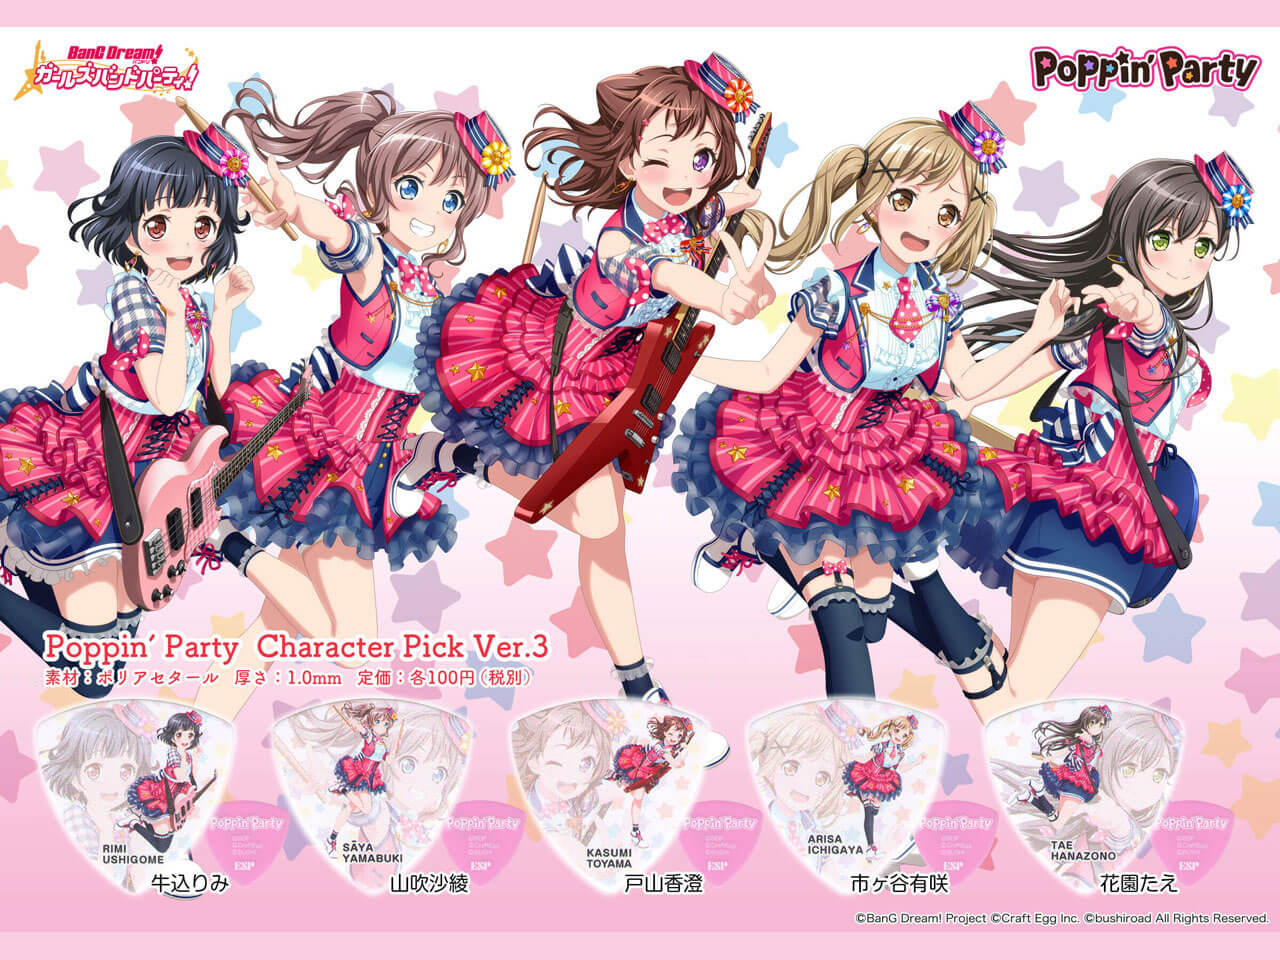 【ESP×BanG Dream!コラボピック】Poppin’Party Character Pick Ver.3 "戸山香澄"10枚セット（GBP Kasumi Poppin Party 3）